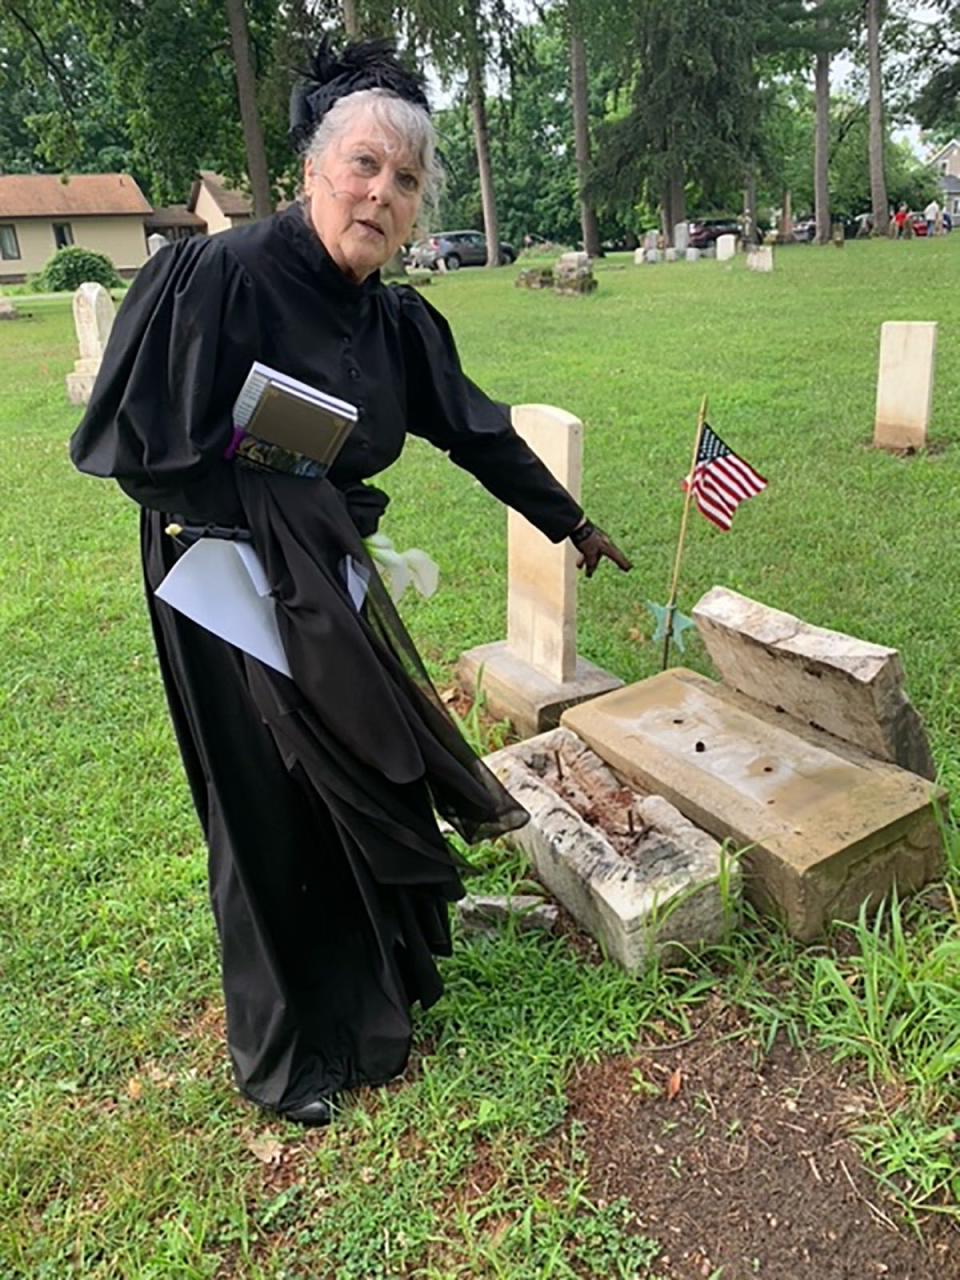 Liz Campbell, a member of the Amos Sturgis chapter of Daughters of the American Revolution, said nature and vandalism have taken their toll on a number of headstones at Old Centreville Cemetery. Campbell and DAR members are working methodically to clean and repair the headstones.